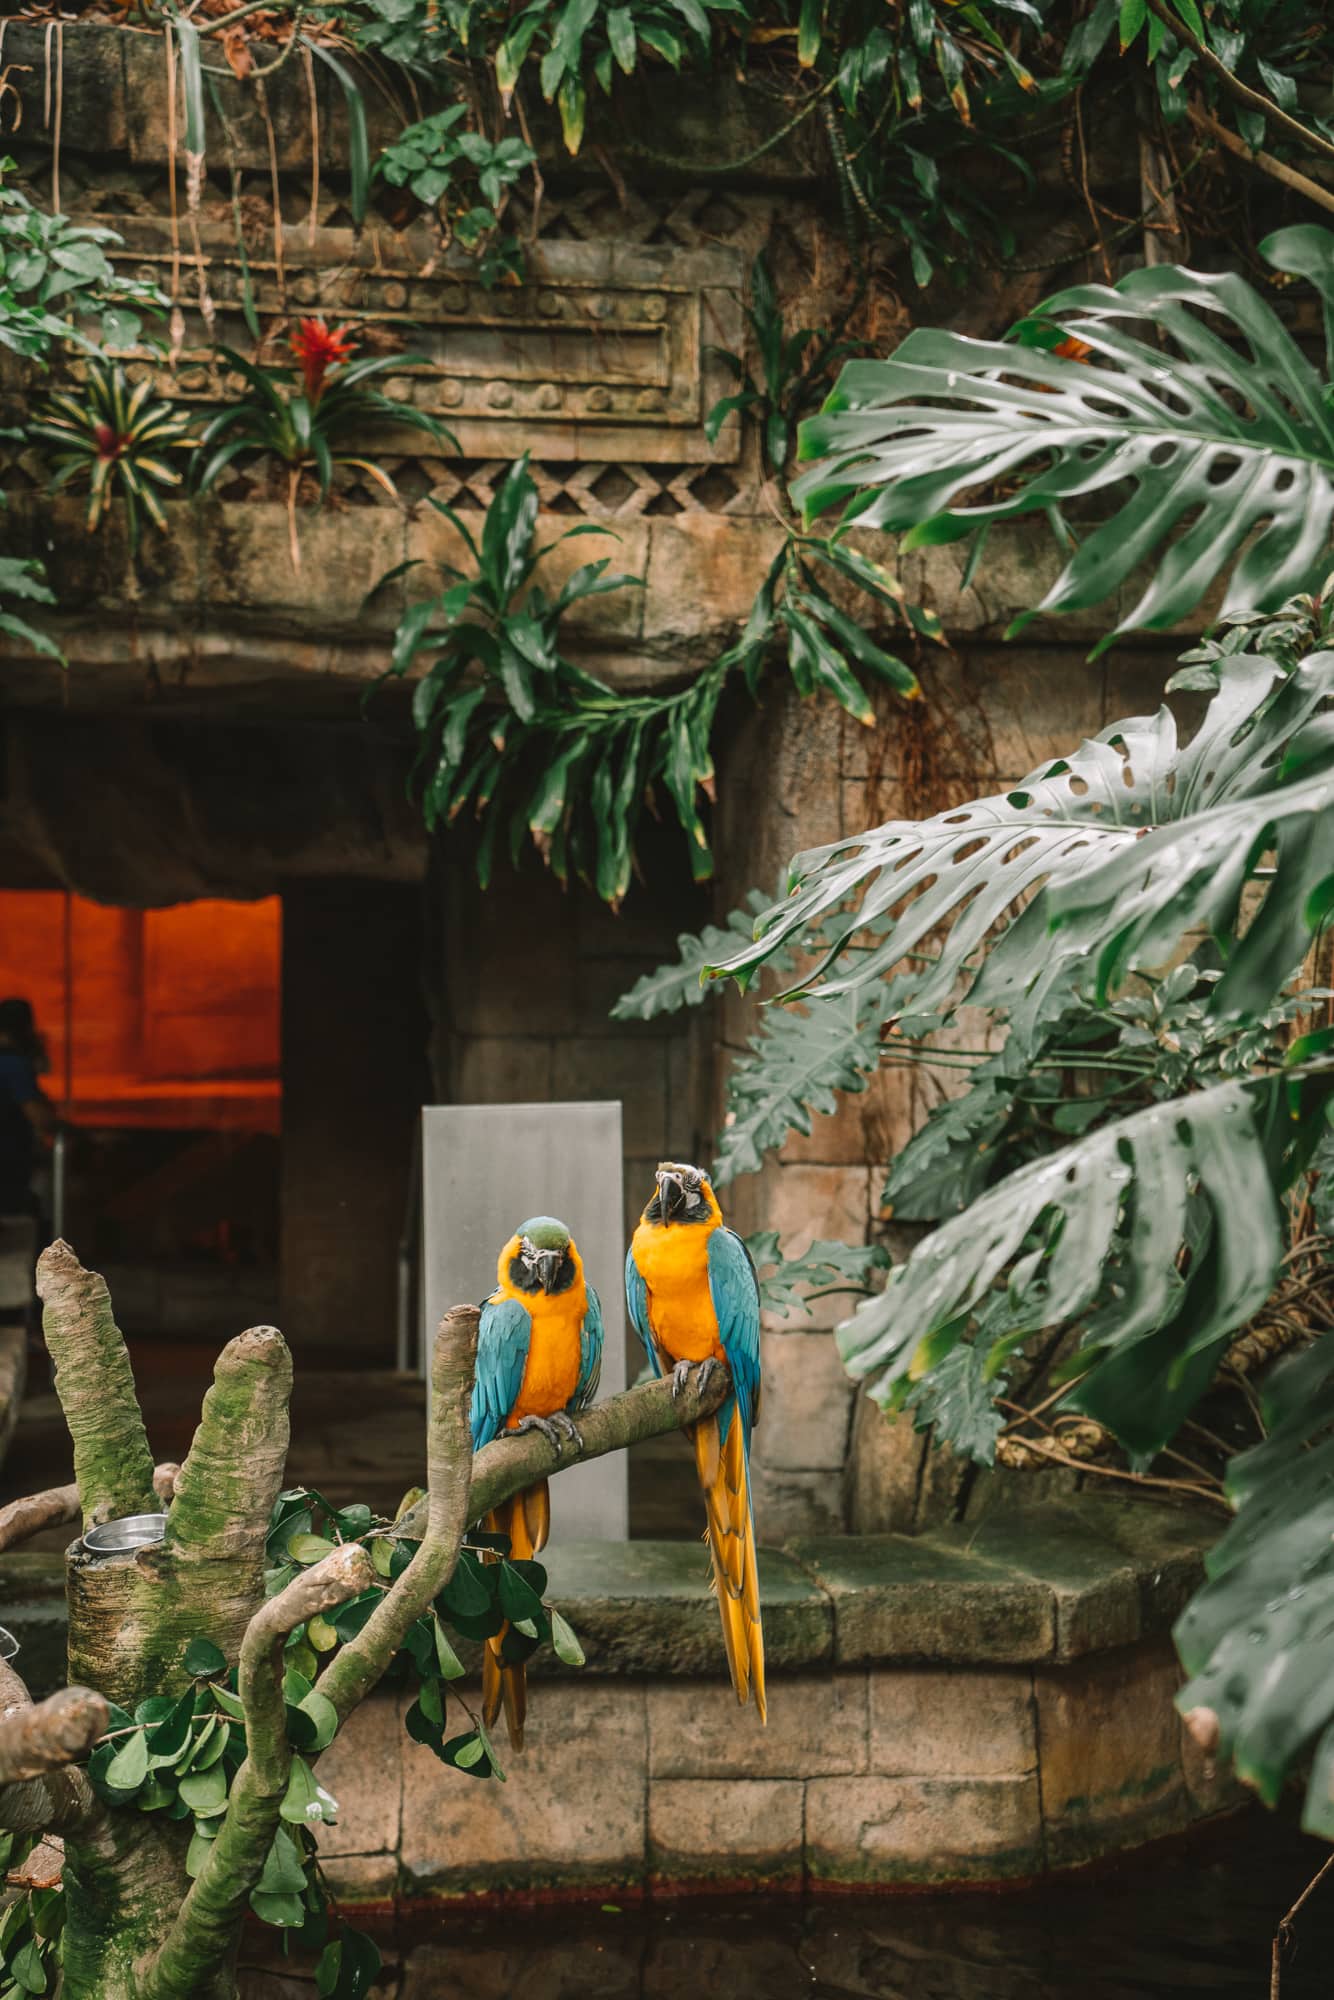 Parrots sitting in the Moody Gardens rainforest